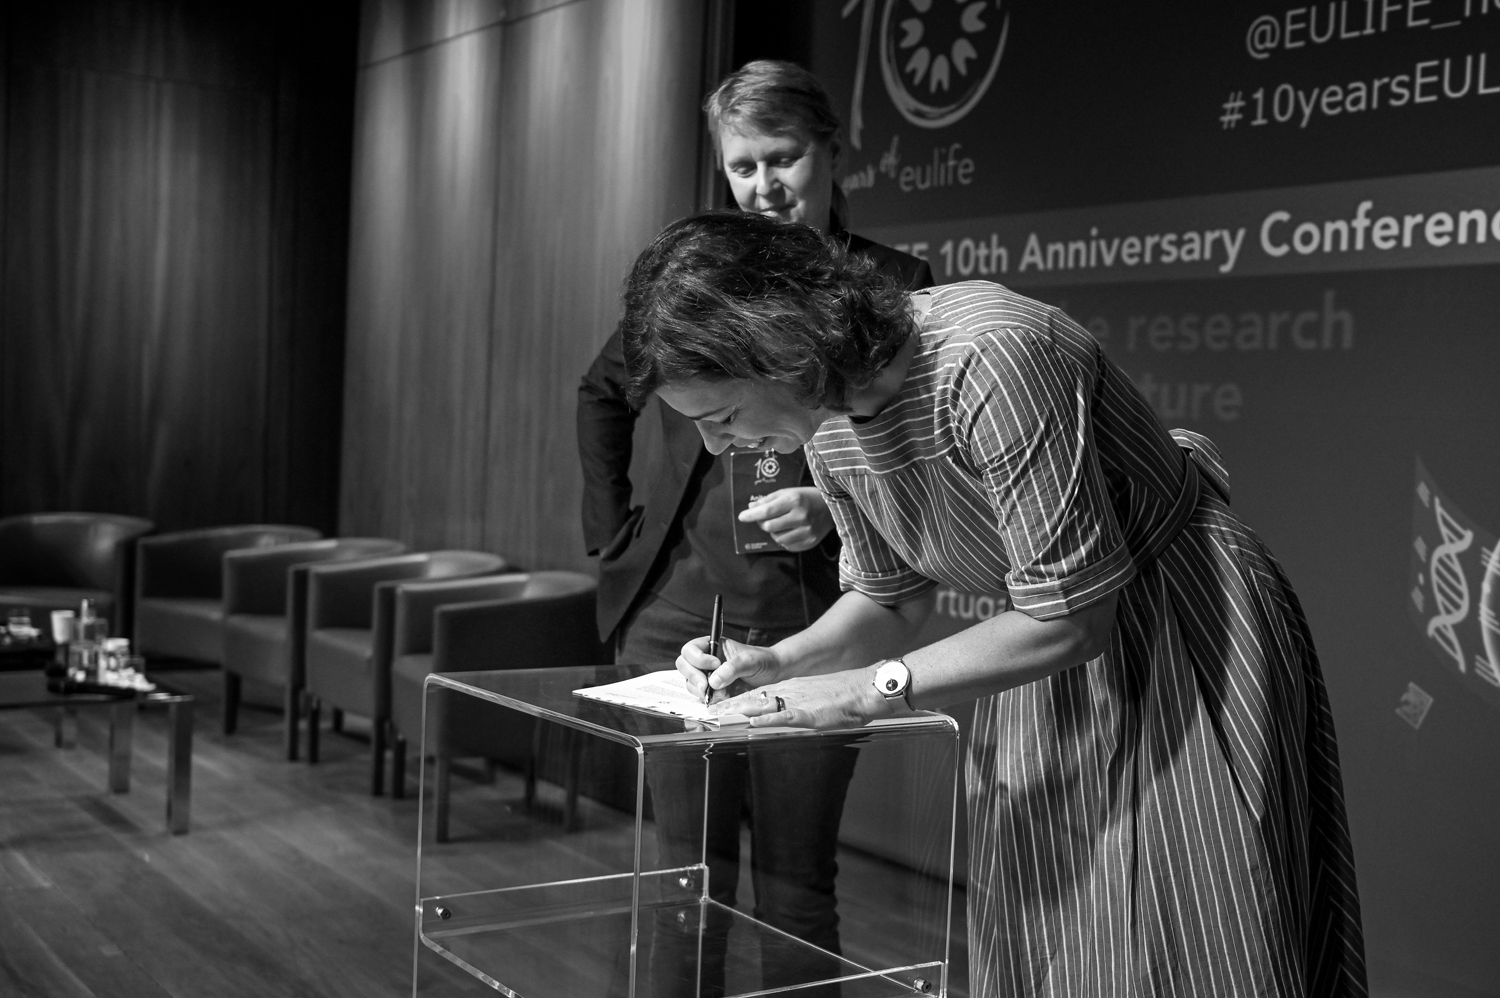 Mónica Bettencourt-Dias (IGC) and Anita Ender (CeMM) sign the Charter on behalf of the Board of Directors during the EU-LIFE 10th Anniversary Conference